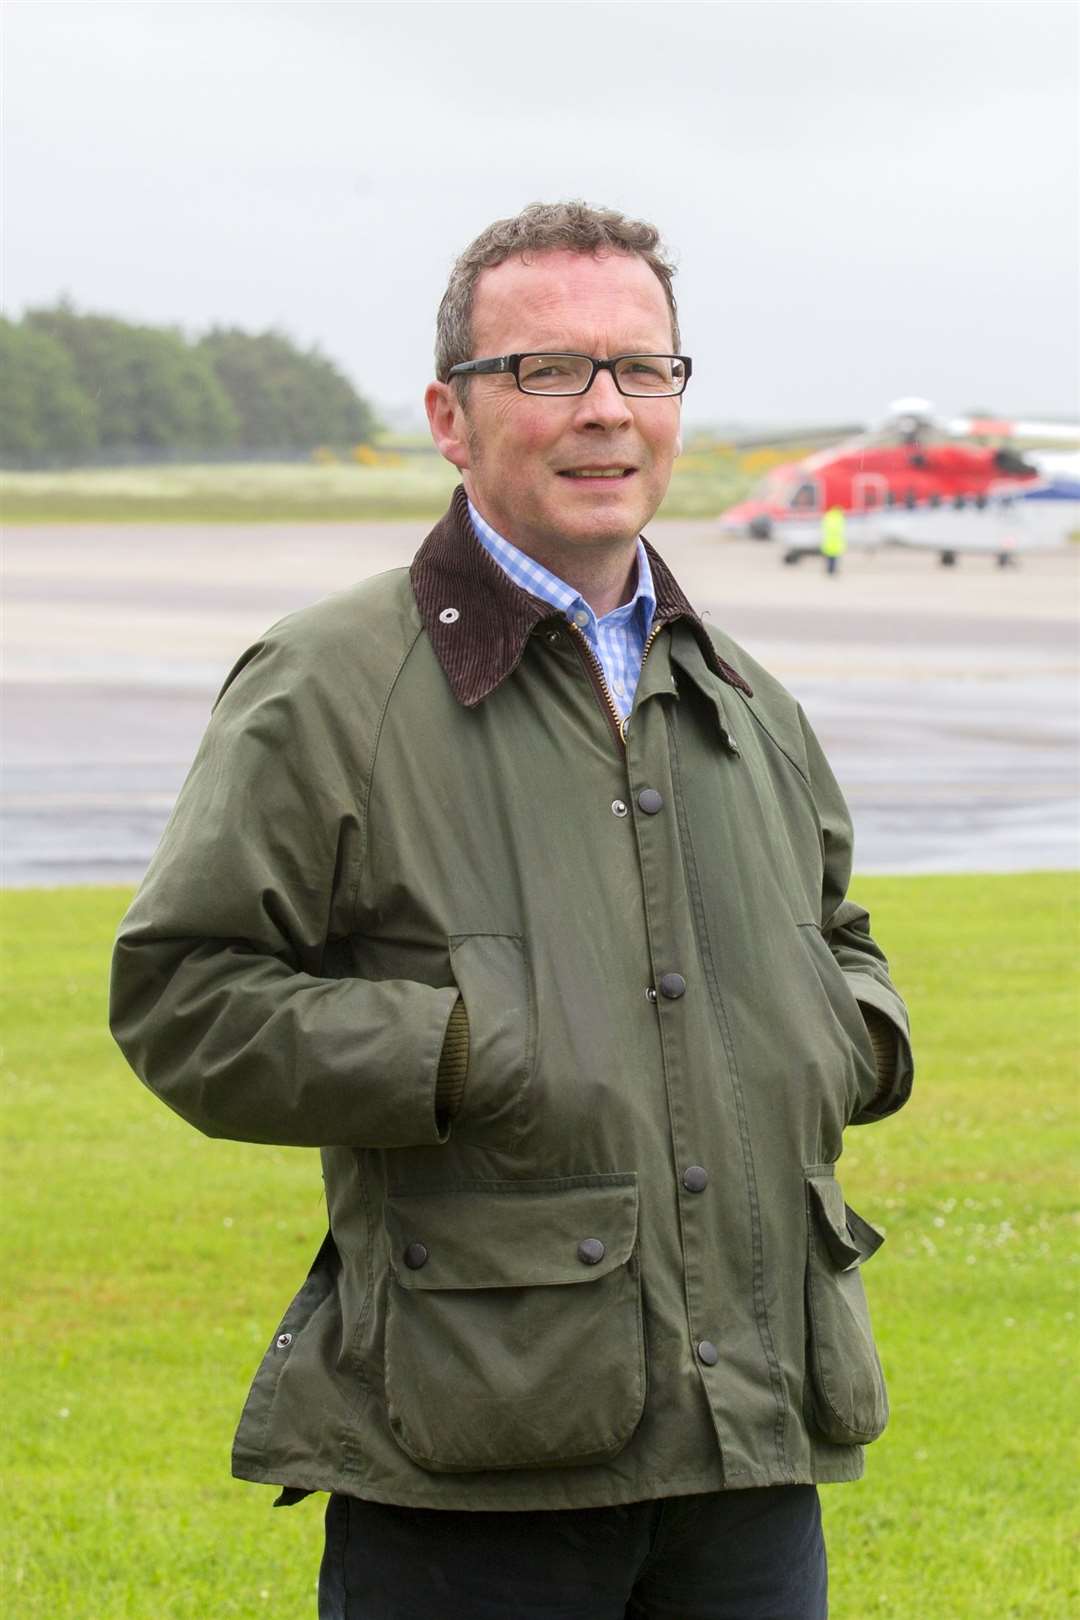 Highlands and Islands Airports Limited managing director Inglis Lyon.